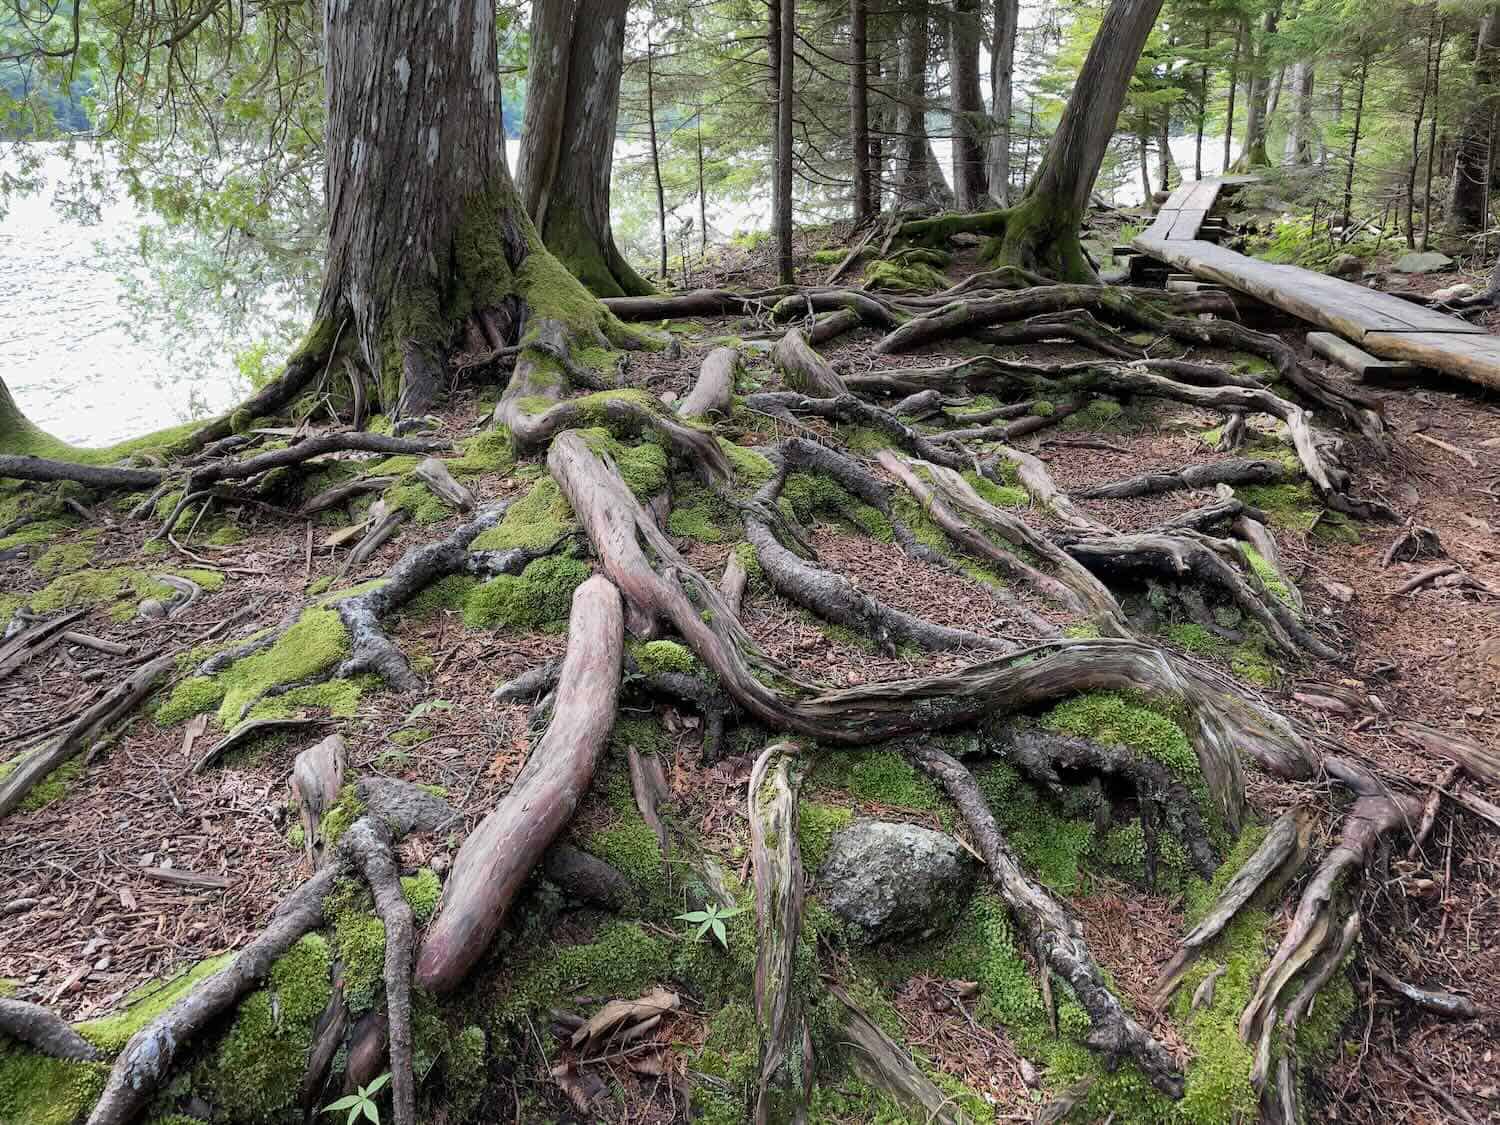 A wood boardwalk travels next to large exposed tree roots on the way to Jordan Pond in Acadia.